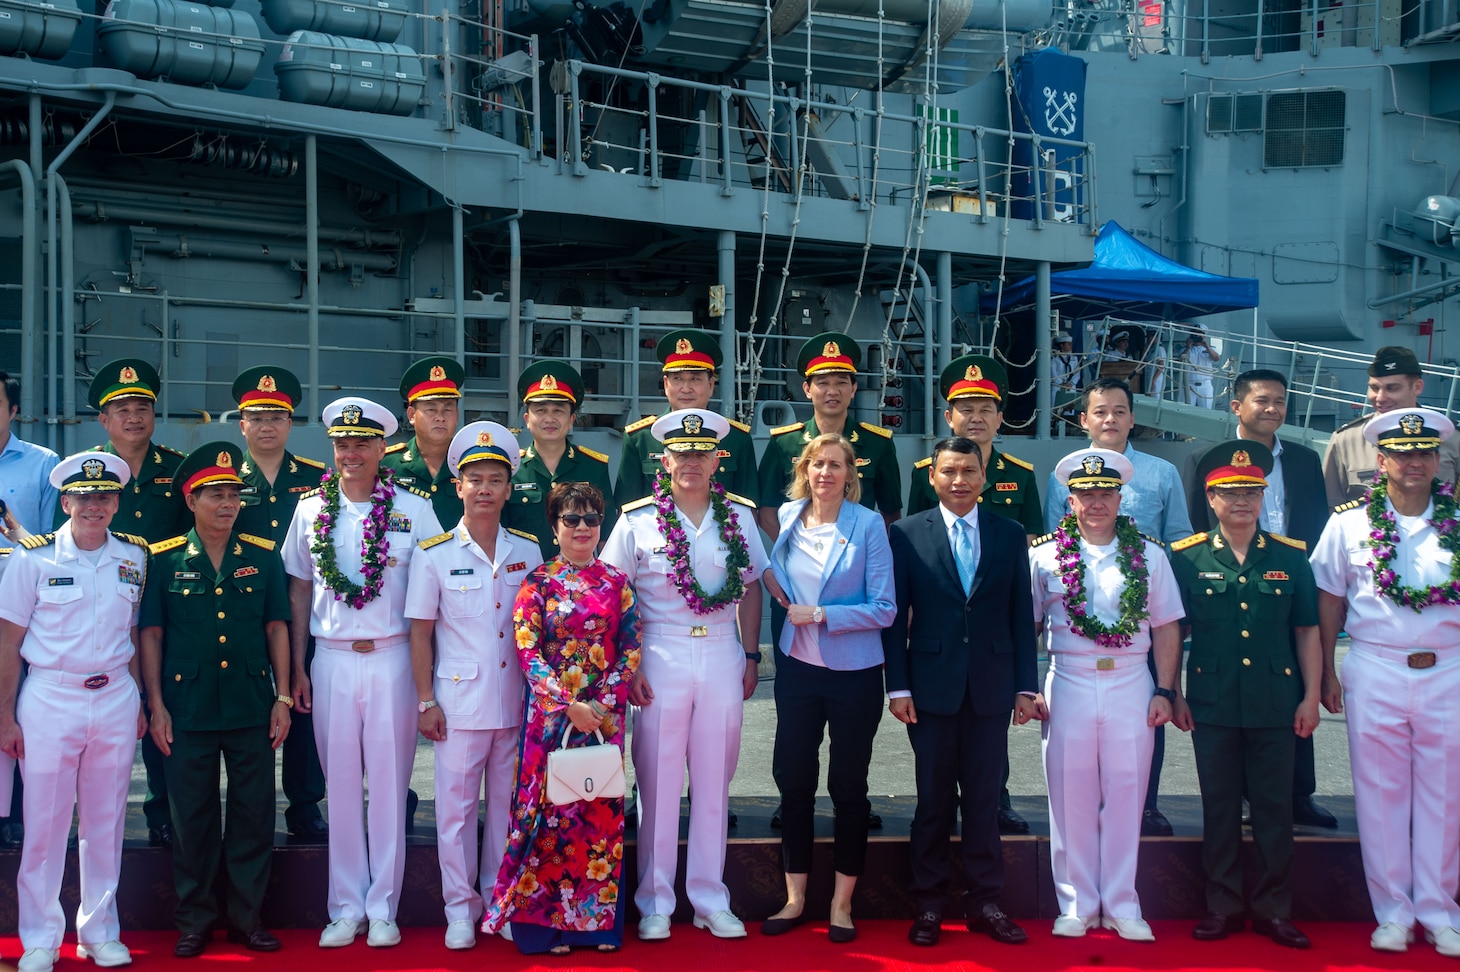 DA NANG, Vietnam (June 25, 2023) – Rear Adm. Pat Hannifin, center, commander, Task Force 70/Carrier Strike Group 5, poses for a photo with strike group leadership and Vietnamese military officers during an arrival ceremony for the U.S. Navy’s only forward-deployed carrier, USS Ronald Regan (CVN 76), carrier strike group (CSG) in Da Nang, Vietnam June 25, 2023. This marks Ronald Reagan’s first visit to the country since diplomatic relations were re-established. Ronald Reagan CSG is forward-deployed to the 7th Fleet area of operation in support of a free and open Indo-Pacific. (U.S. navy photo by Mass Communication Specialist 2nd Class Askia Collins)